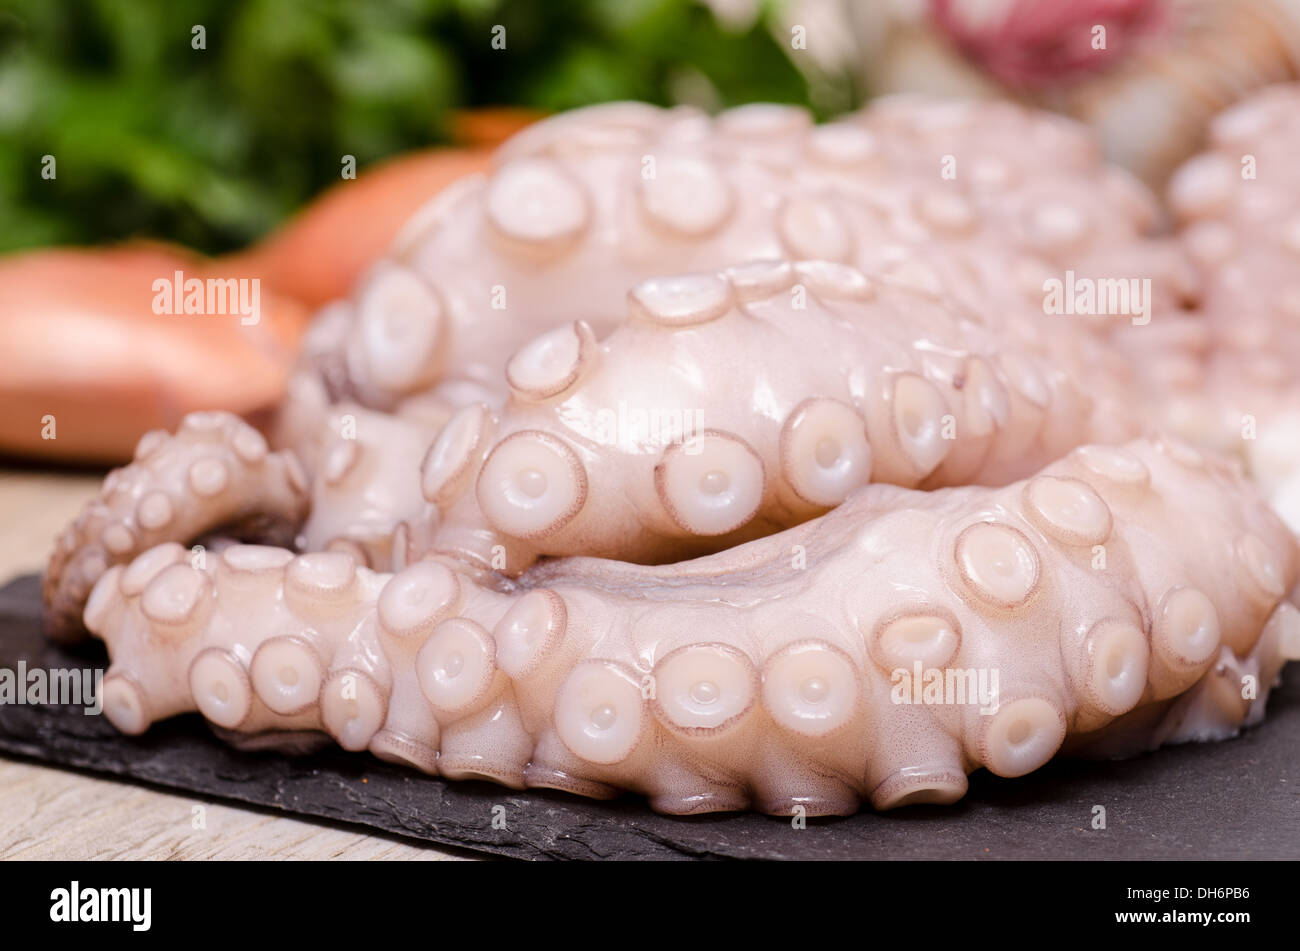 Tentacles of a raw squid Stock Photo